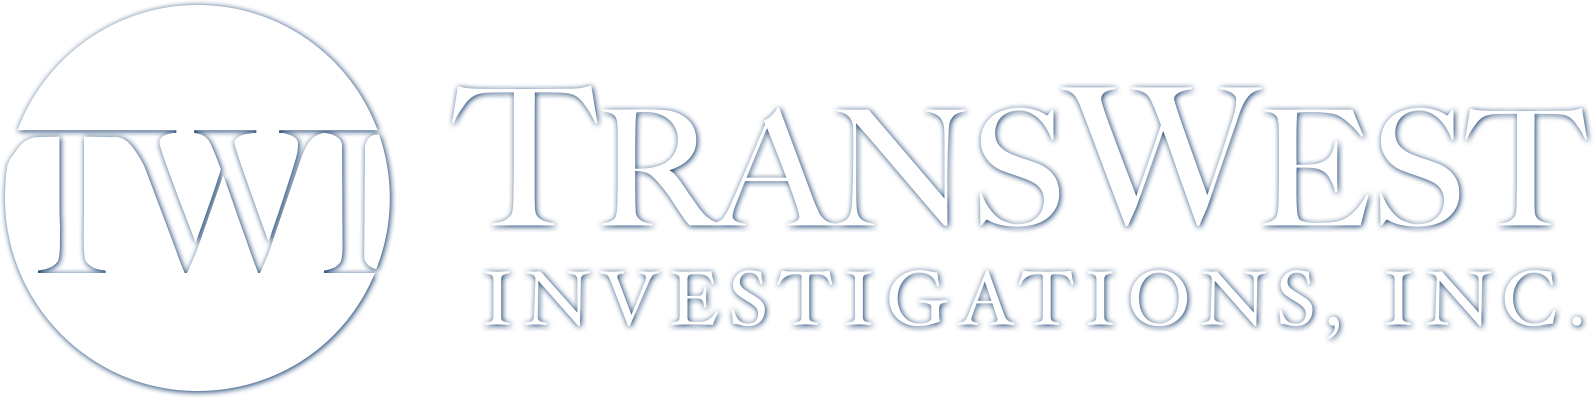 A black and white logo for the transit investigations.